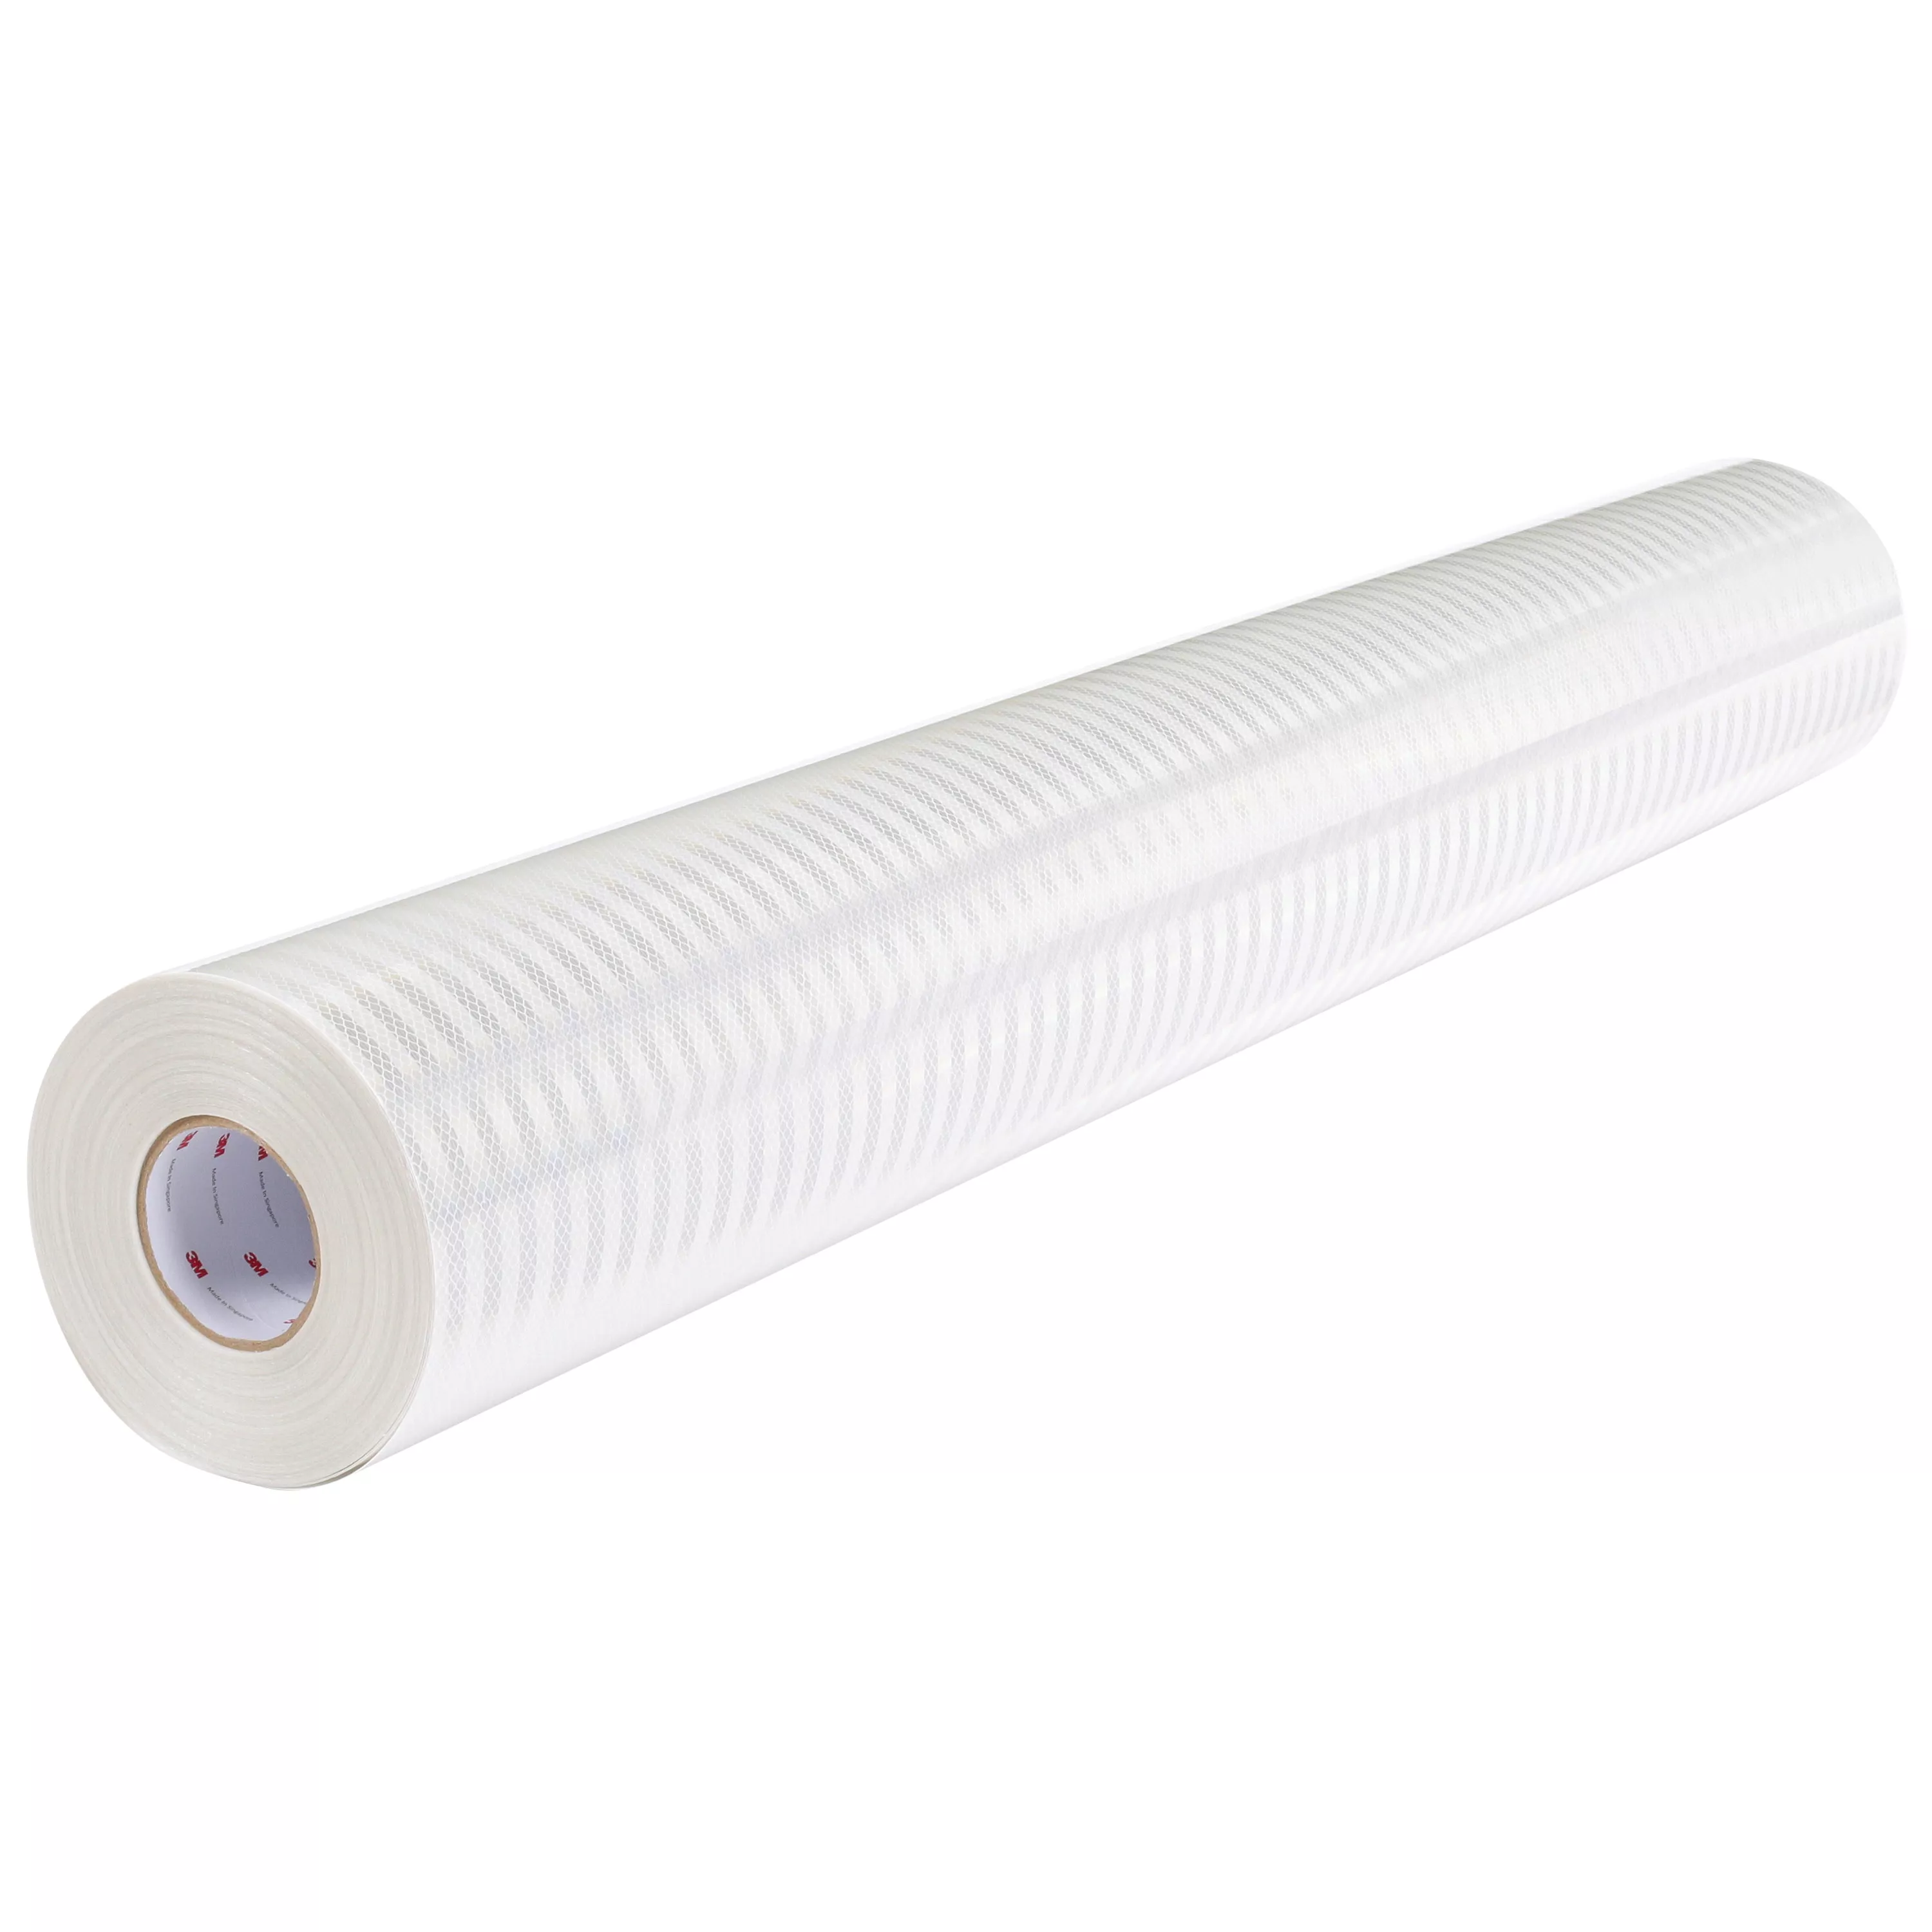 3M™ High Intensity Prismatic Reflective Digital Sheeting 3930UDS, White, 48 in x 50 yd, 1 Roll/Case